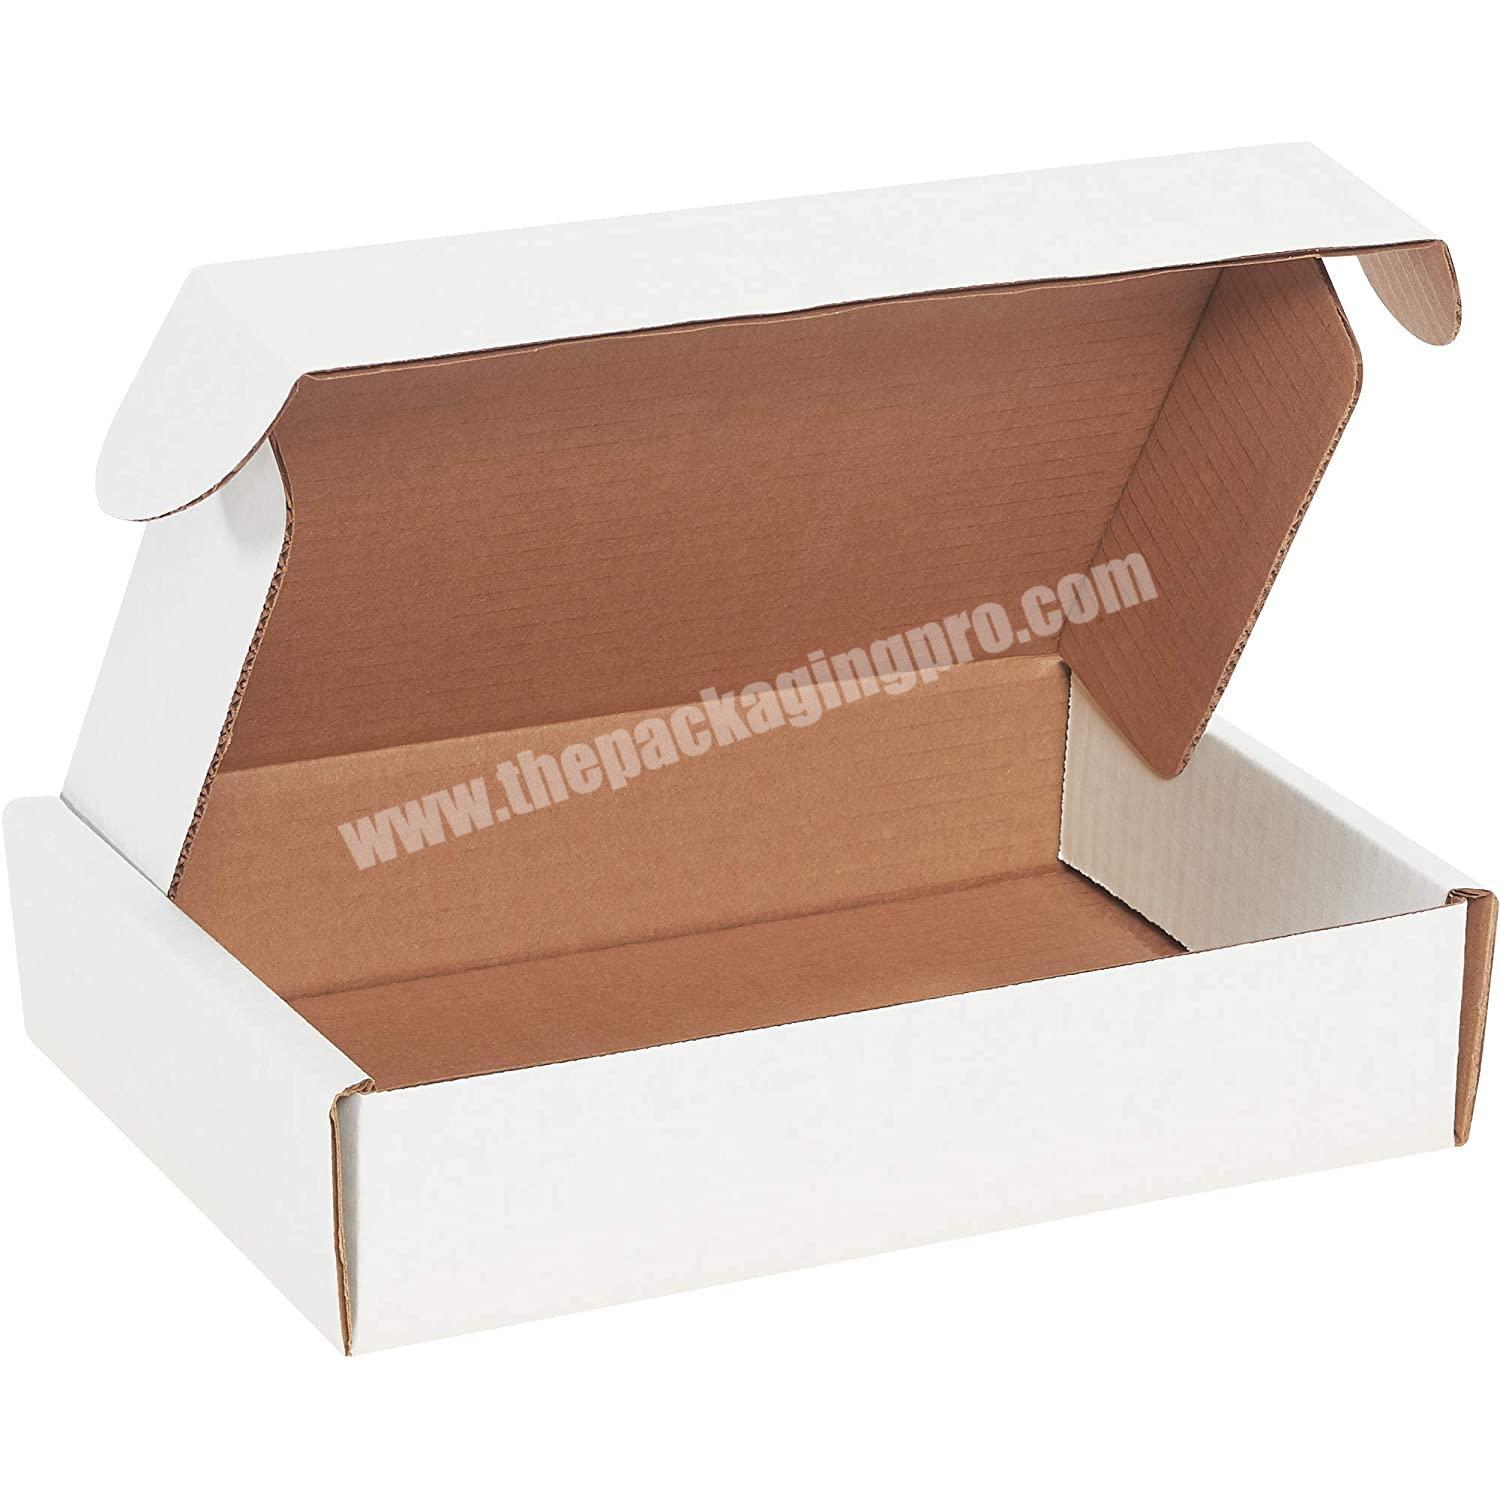 Small MOQ White 9 x 6 x 2 Inches Corrugated carton for Shipping Mailing and Storing Moving shipping Mailer Paper Box